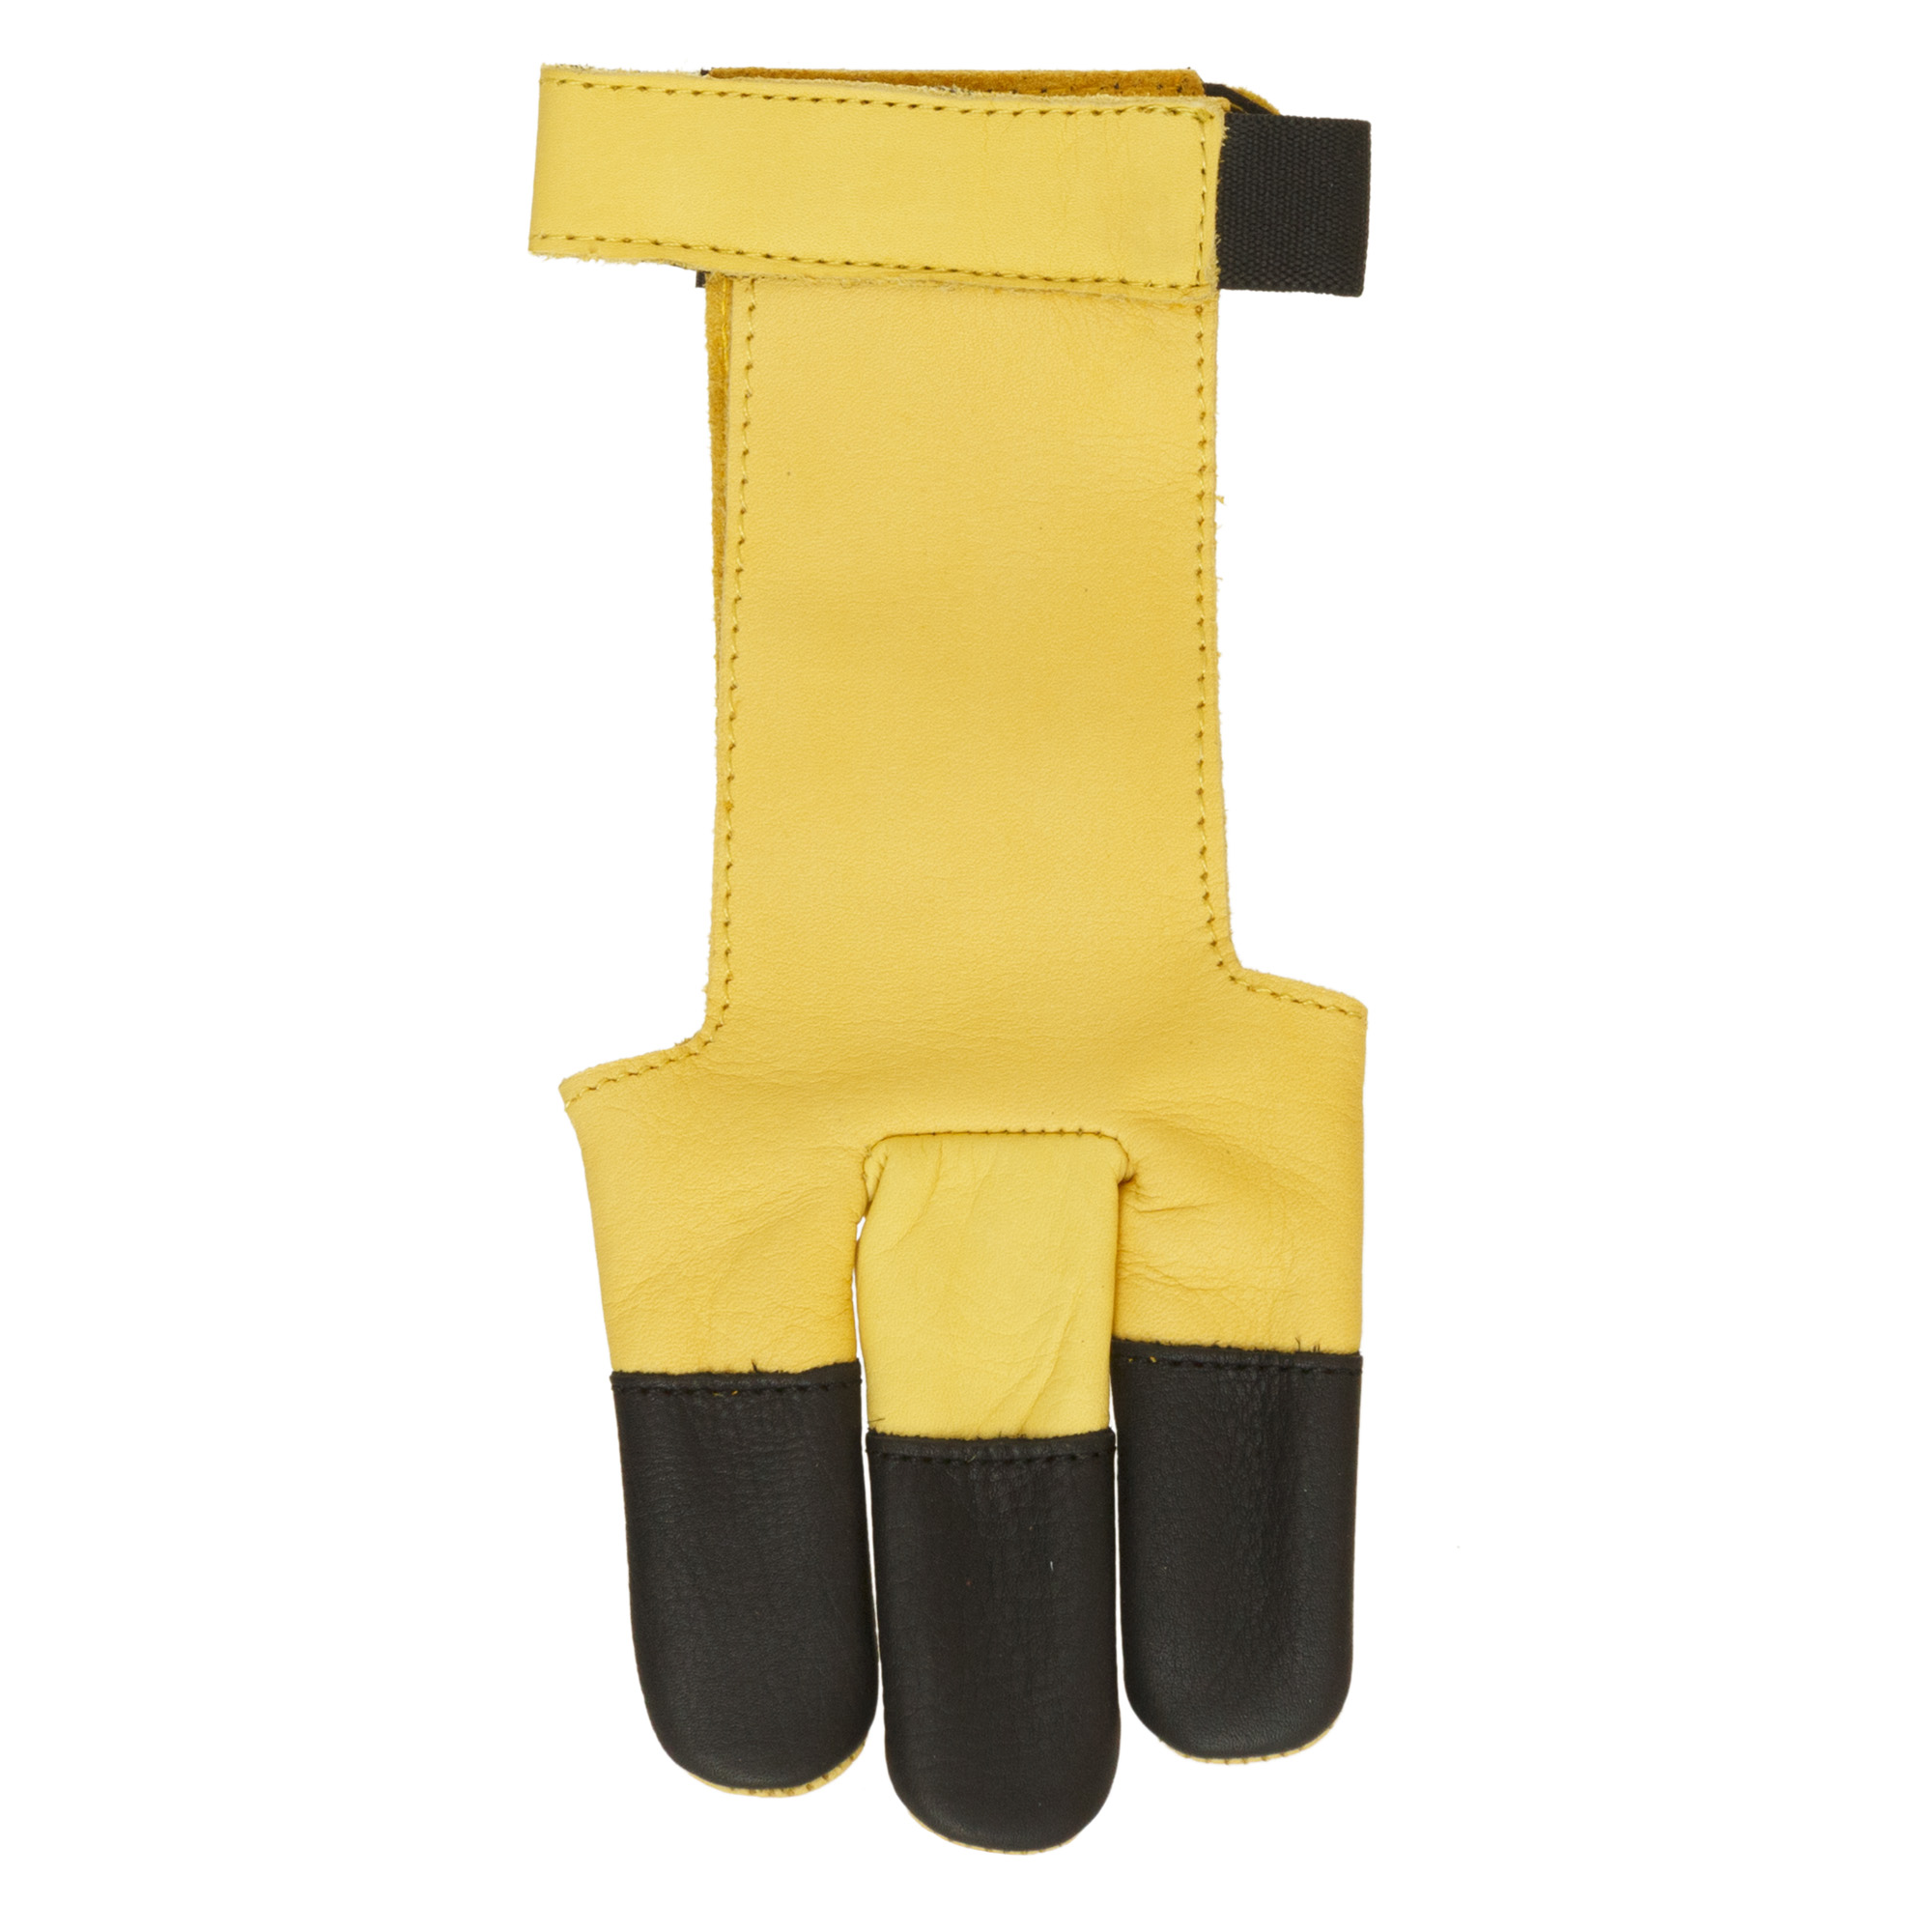 October Mountain Products Traditional Shooters Glove Medium